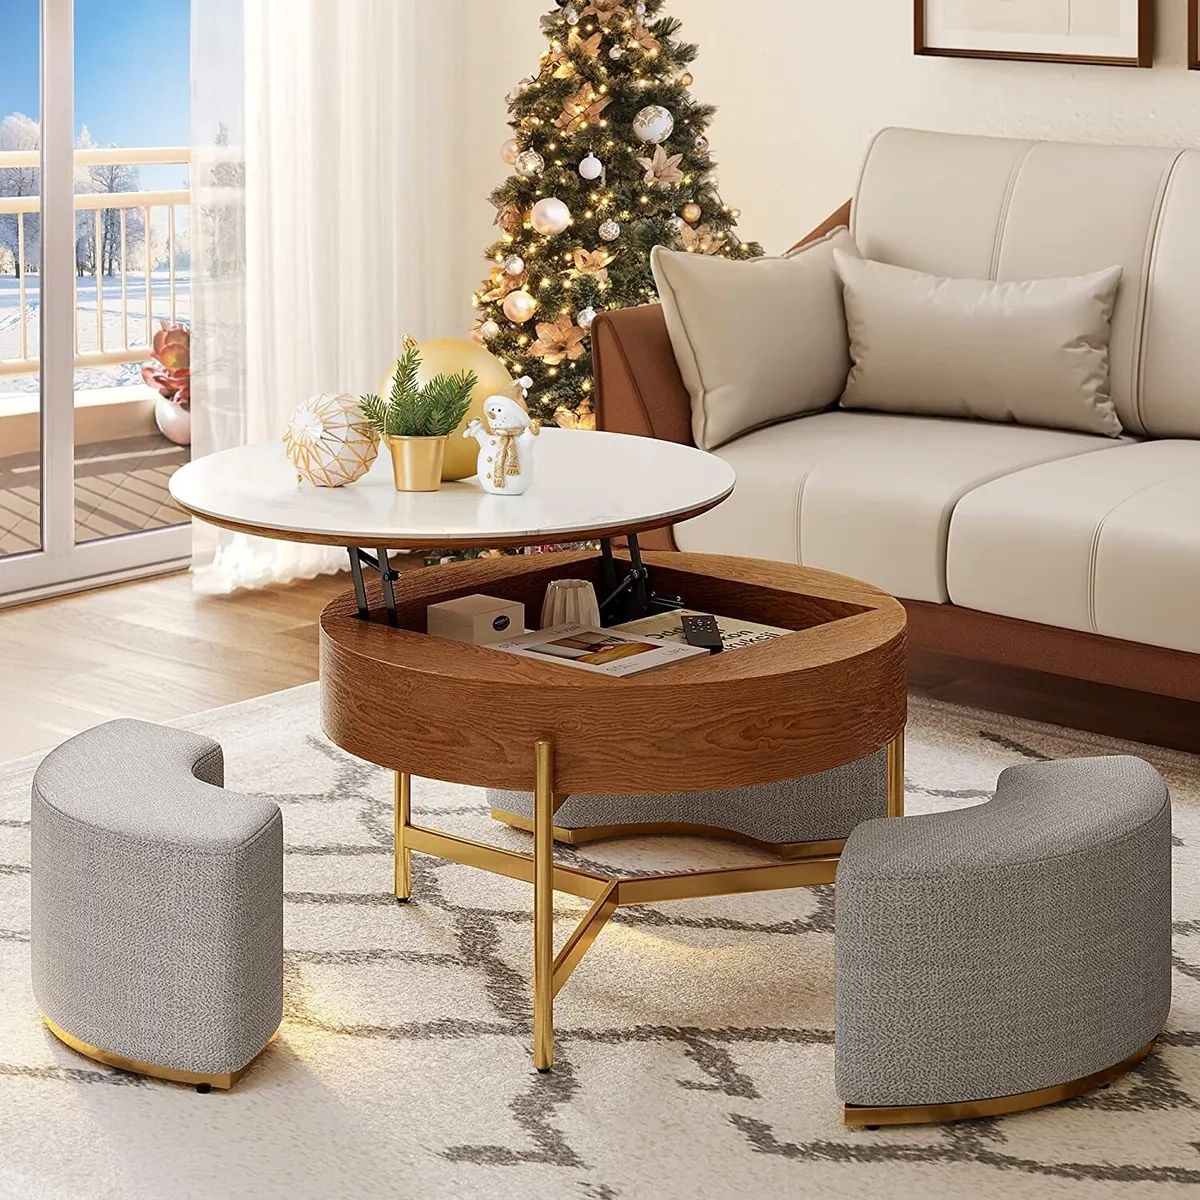 Lift Top Round Coffee Table With Hidden Storage Compartment 3 Stools Living  Room | Ebay In Modern Coffee Tables With Hidden Storage Compartments (View 6 of 15)